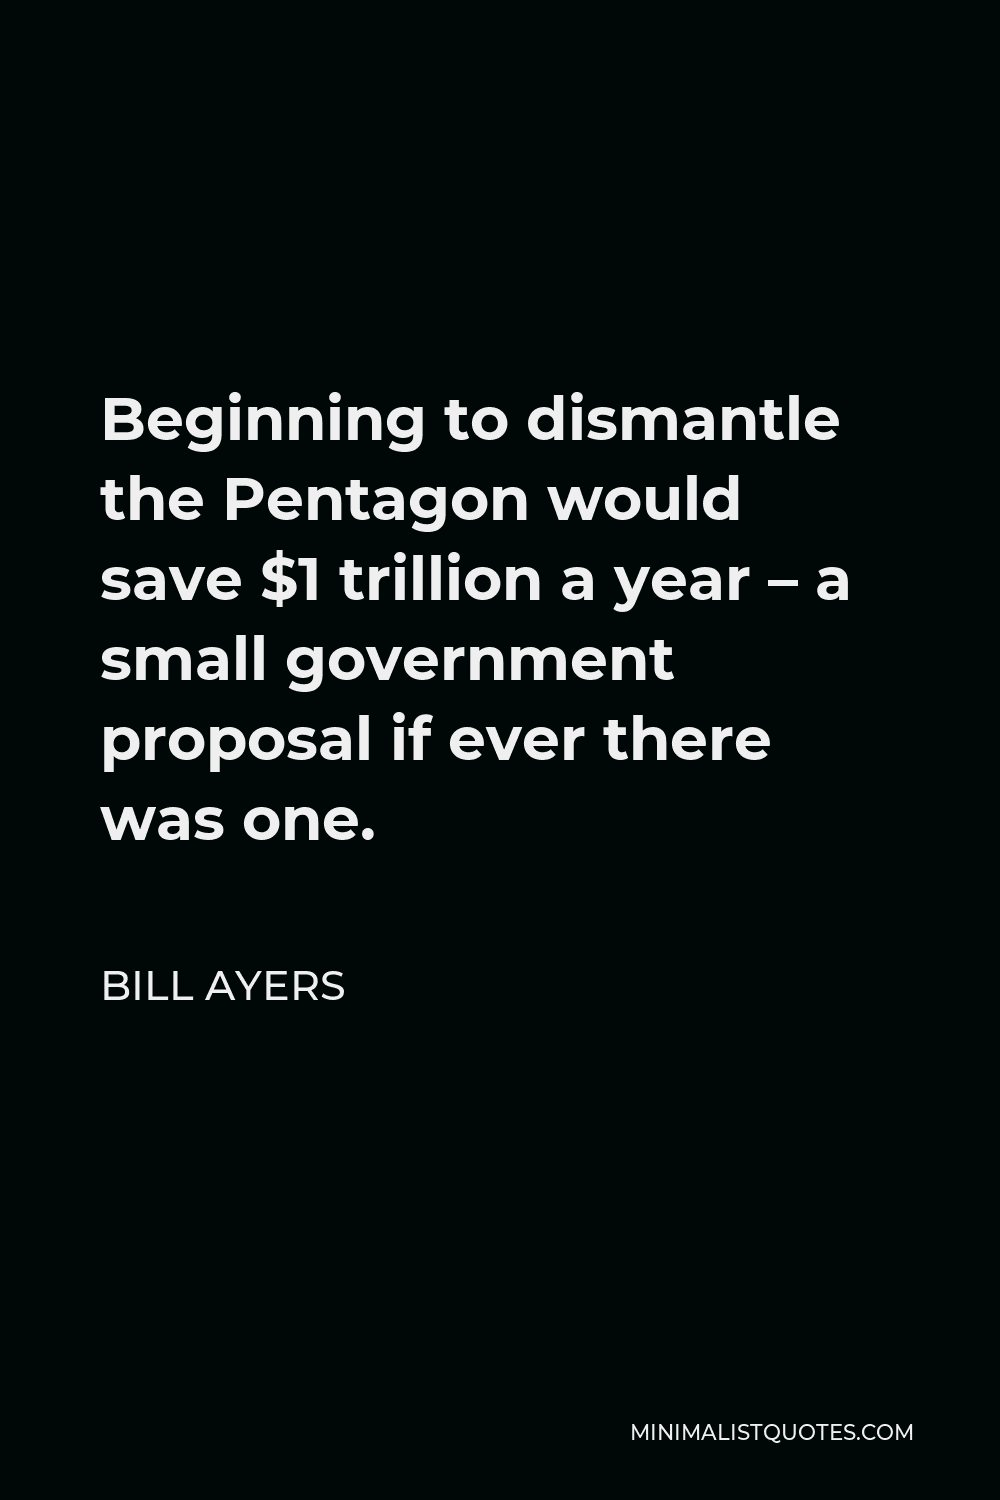 Bill Ayers Quote - Beginning to dismantle the Pentagon would save $1 trillion a year – a small government proposal if ever there was one.